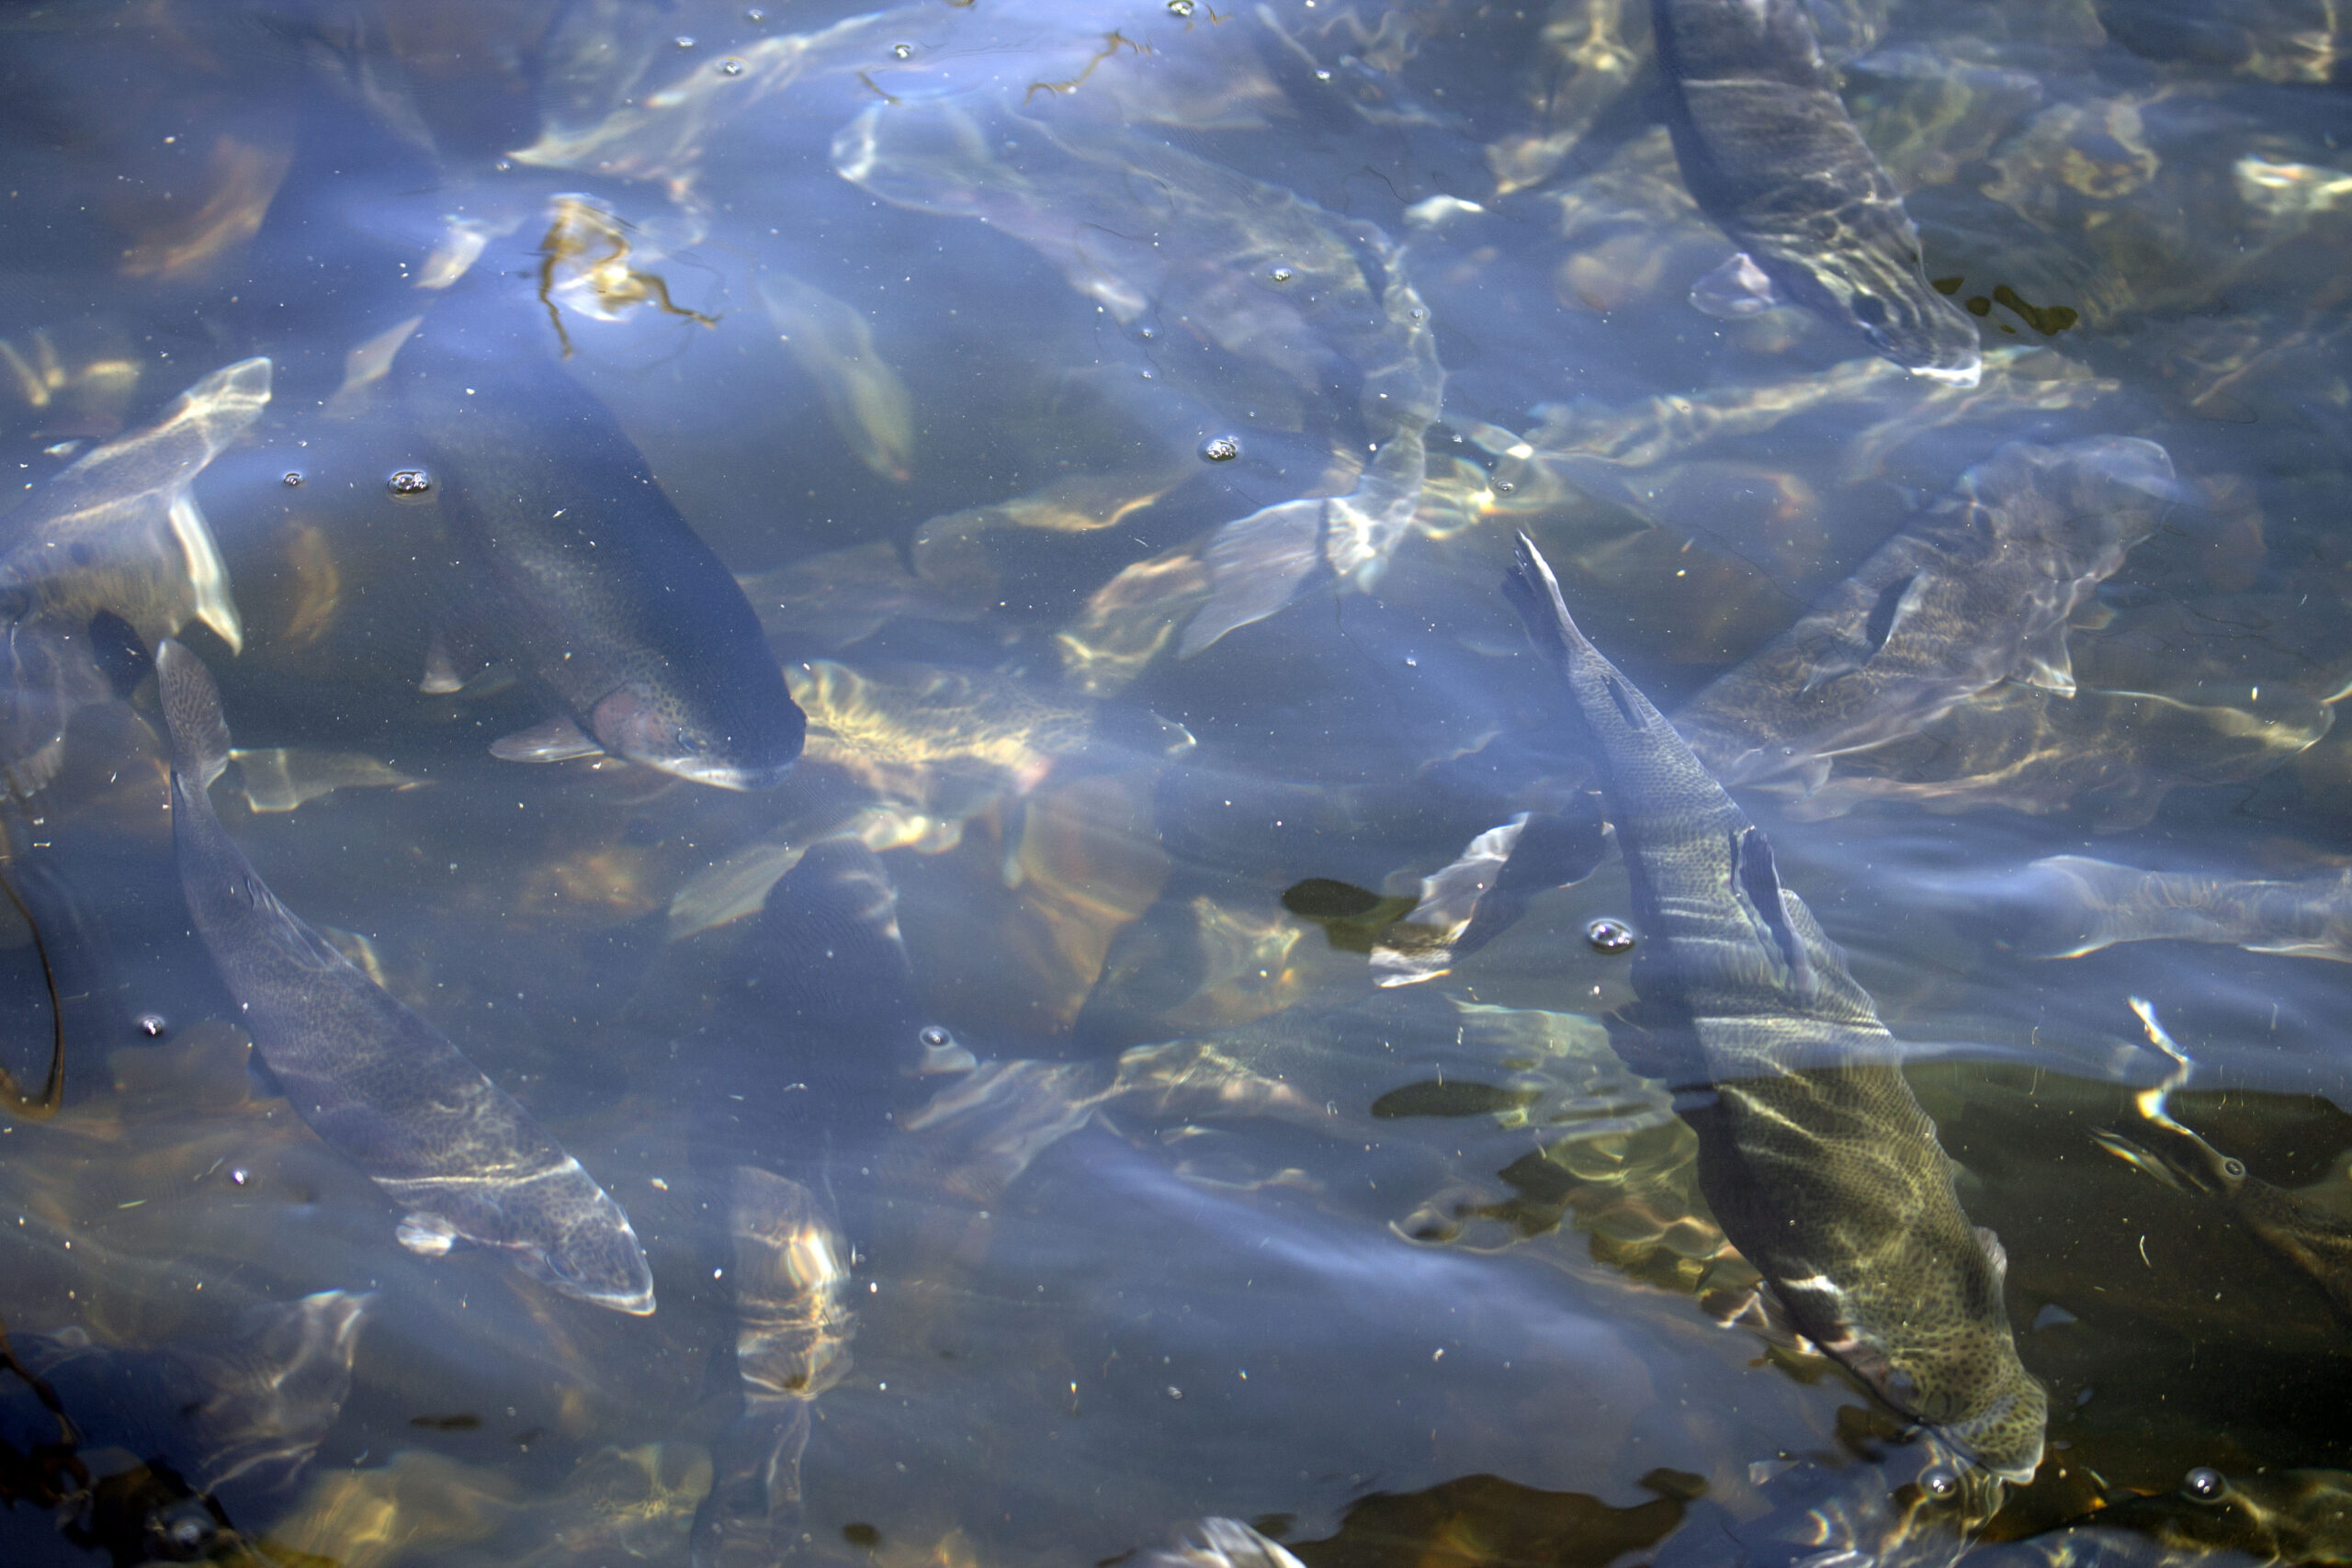 Fish are seen under the water's surface.